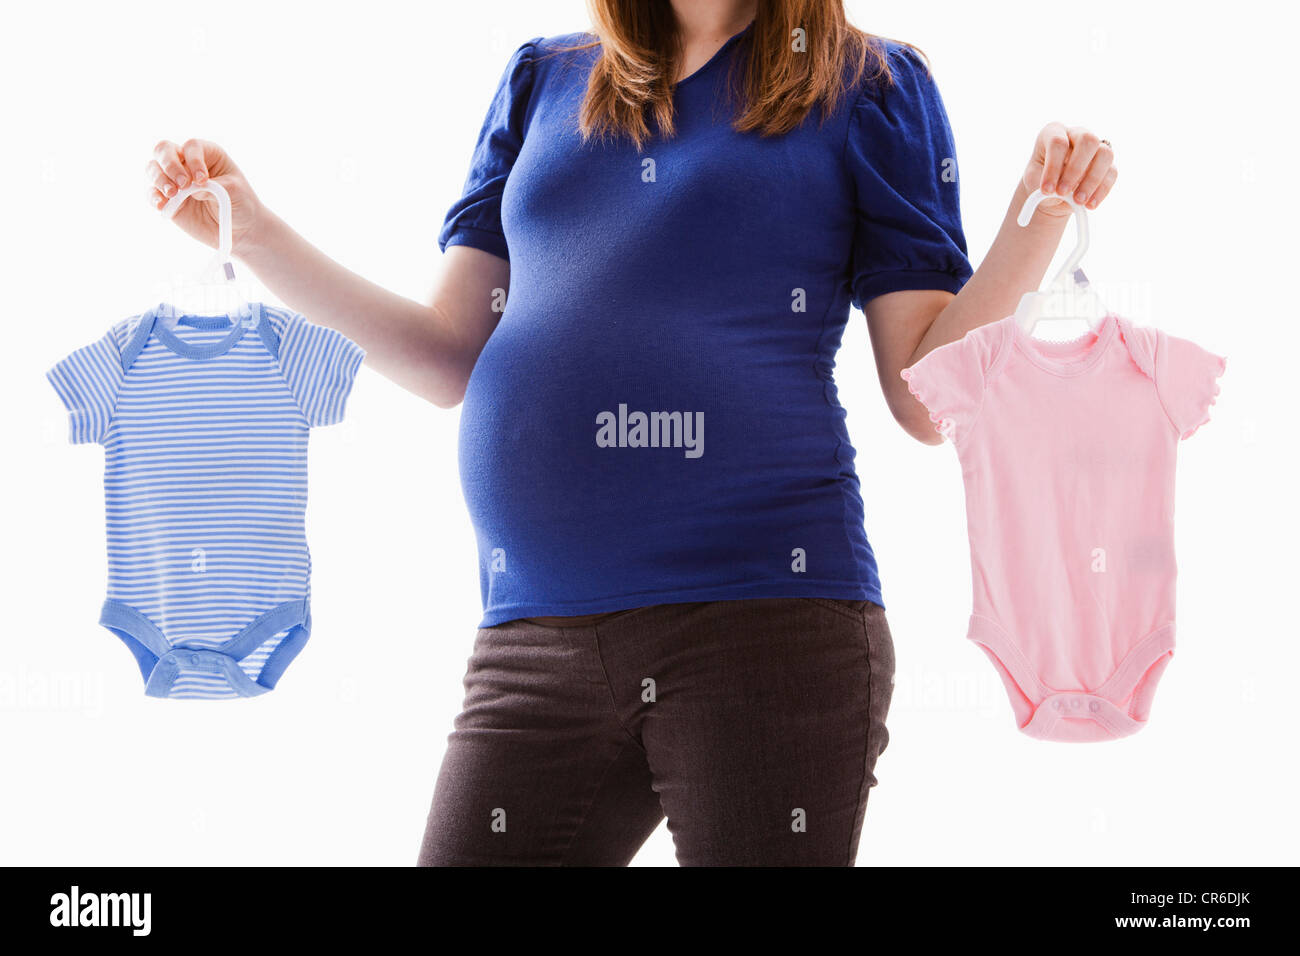 Studio Shot of mid section of pregnant woman holing baby onesie Banque D'Images